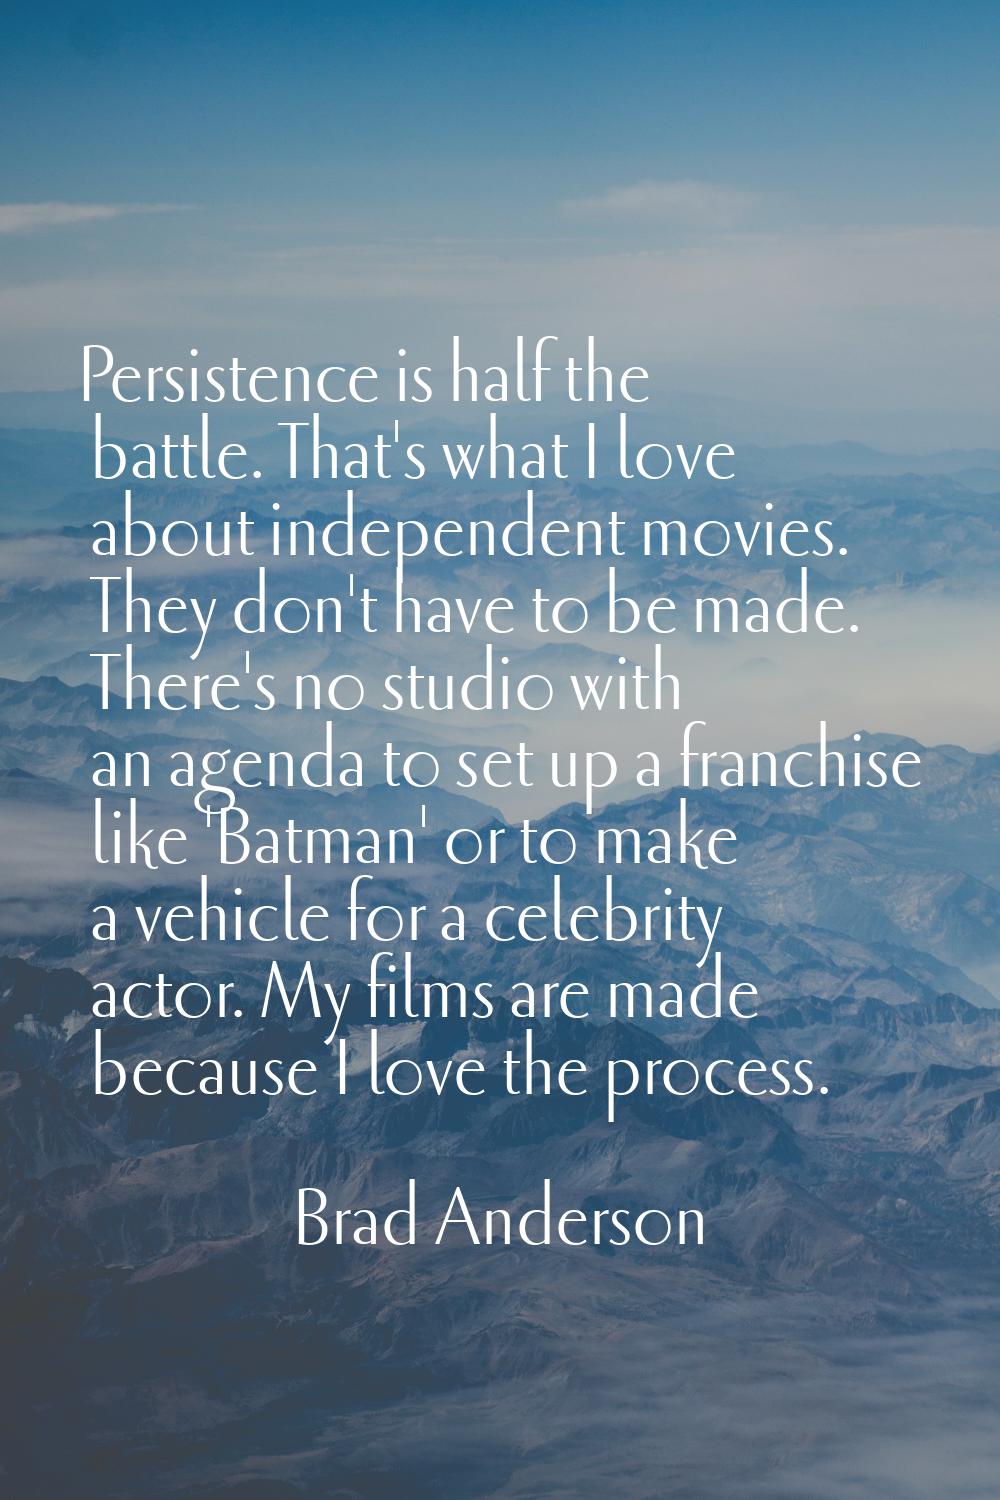 Persistence is half the battle. That's what I love about independent movies. They don't have to be 